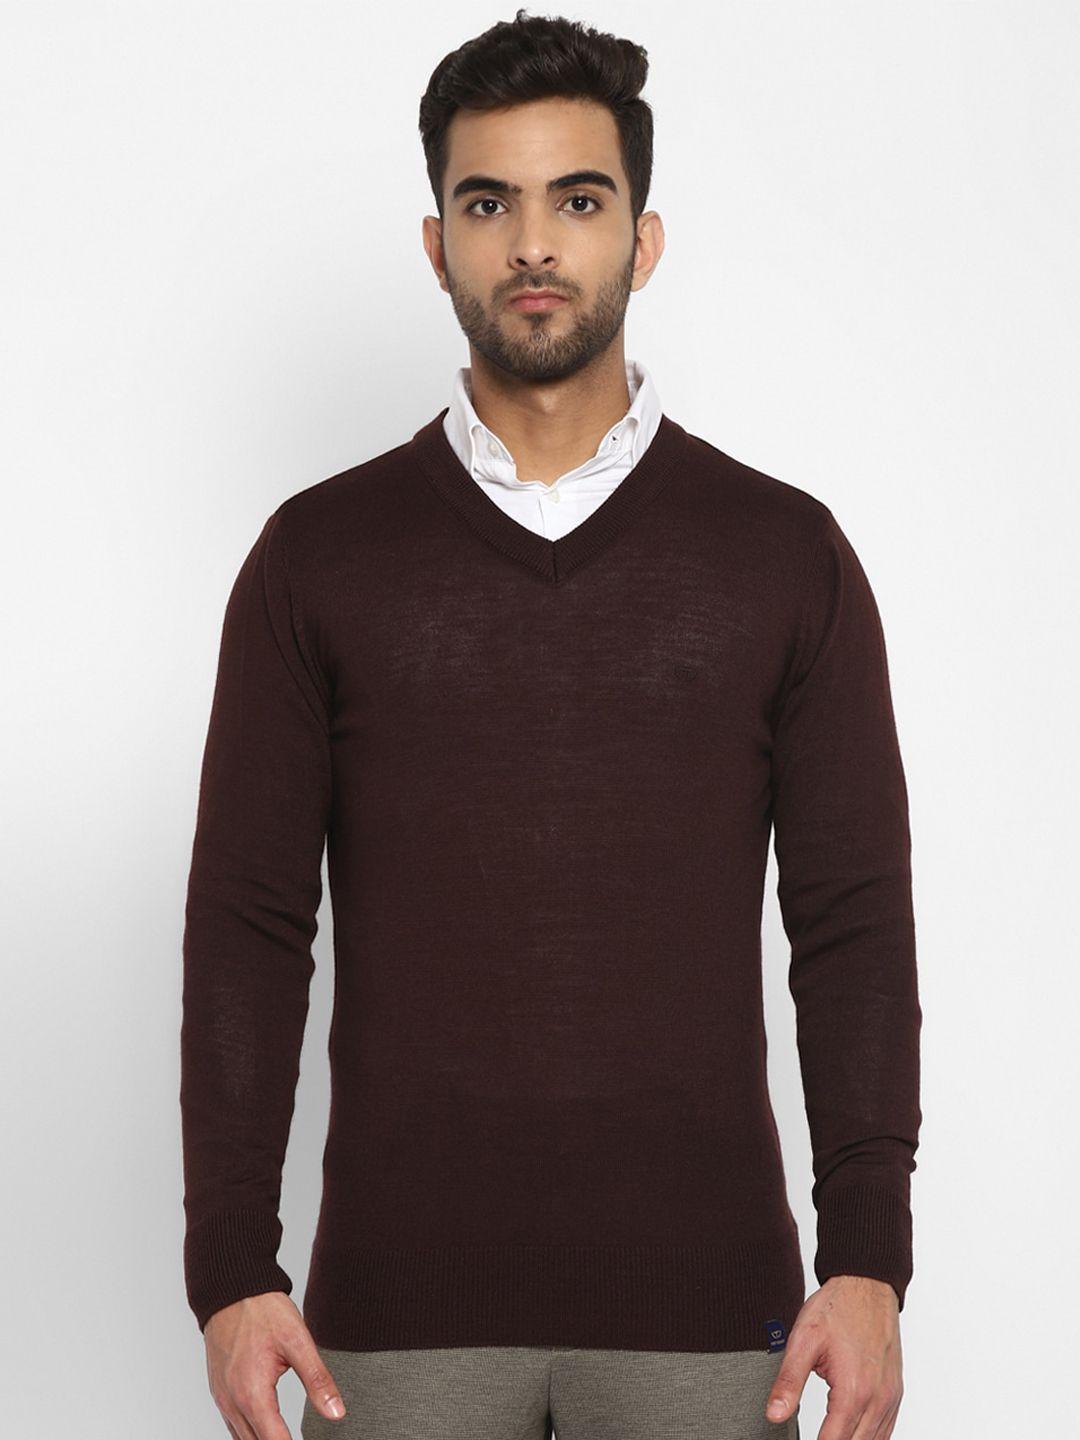 top brass v-neck wool pullover sweater